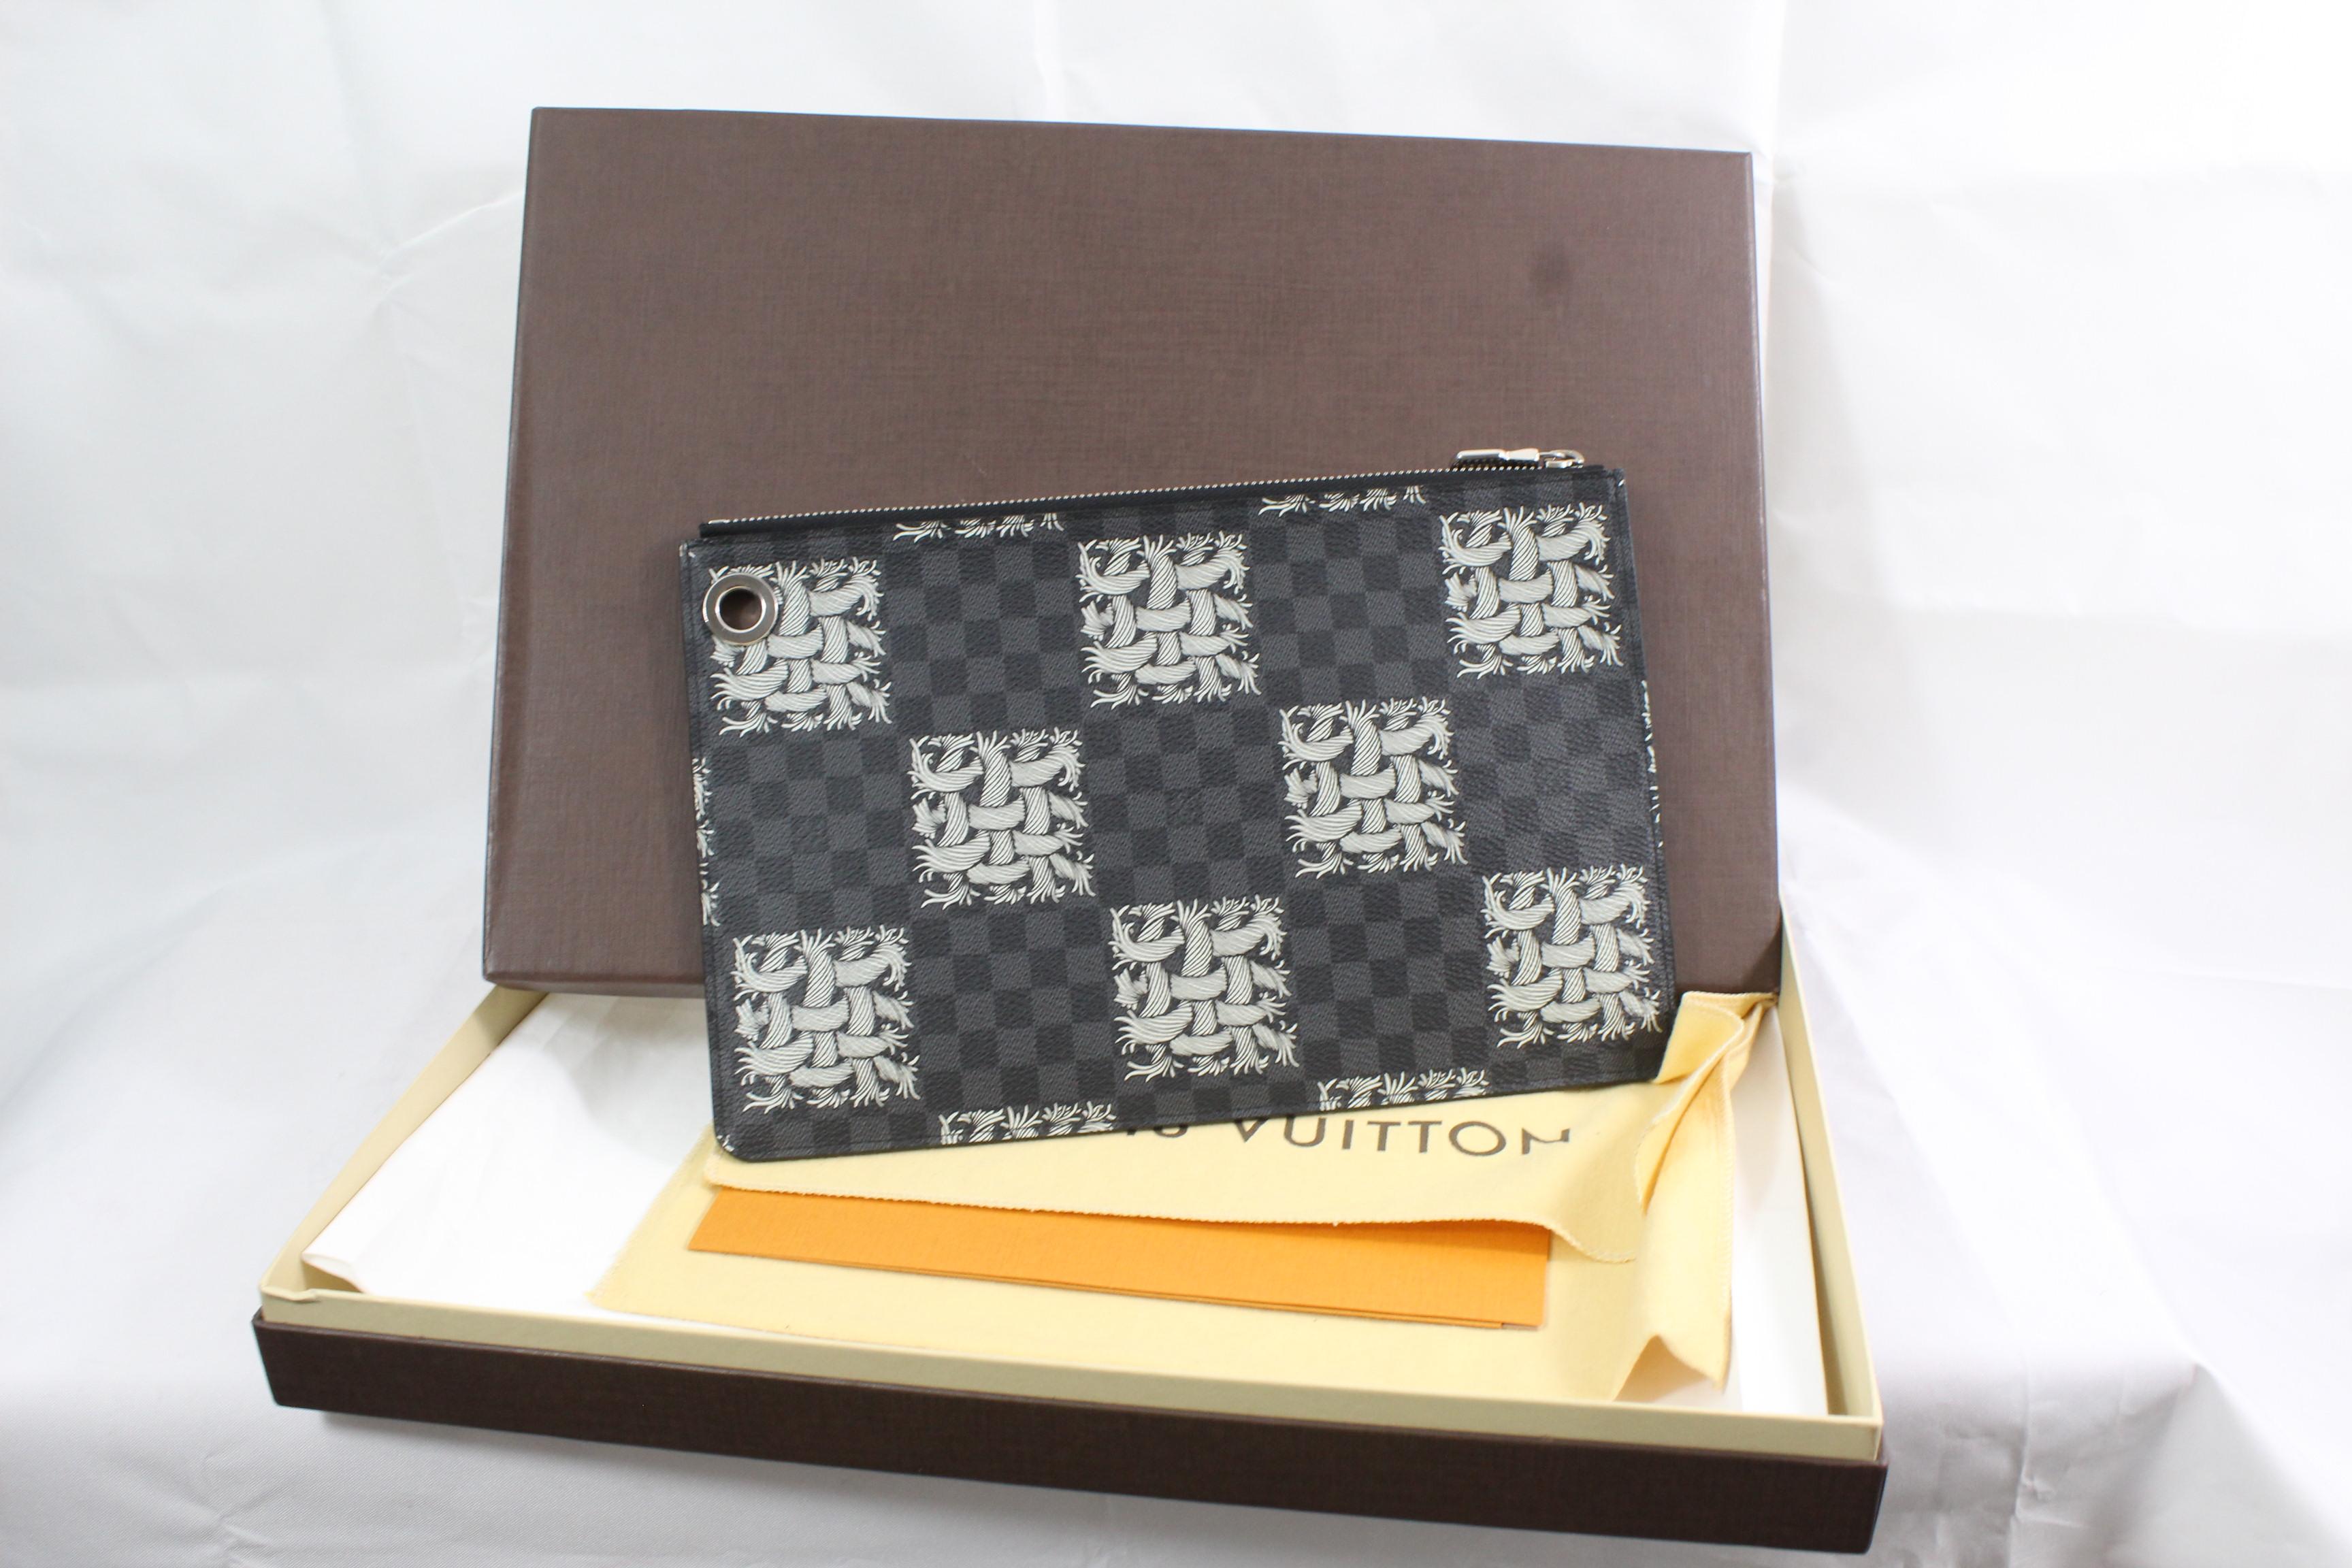 Men's Louis Vuitton Collectible Damier Graphite Cristopher Memeth Clutch

Comes with box, dusst bag and invoece.

Size: 10.5x7.5 inches